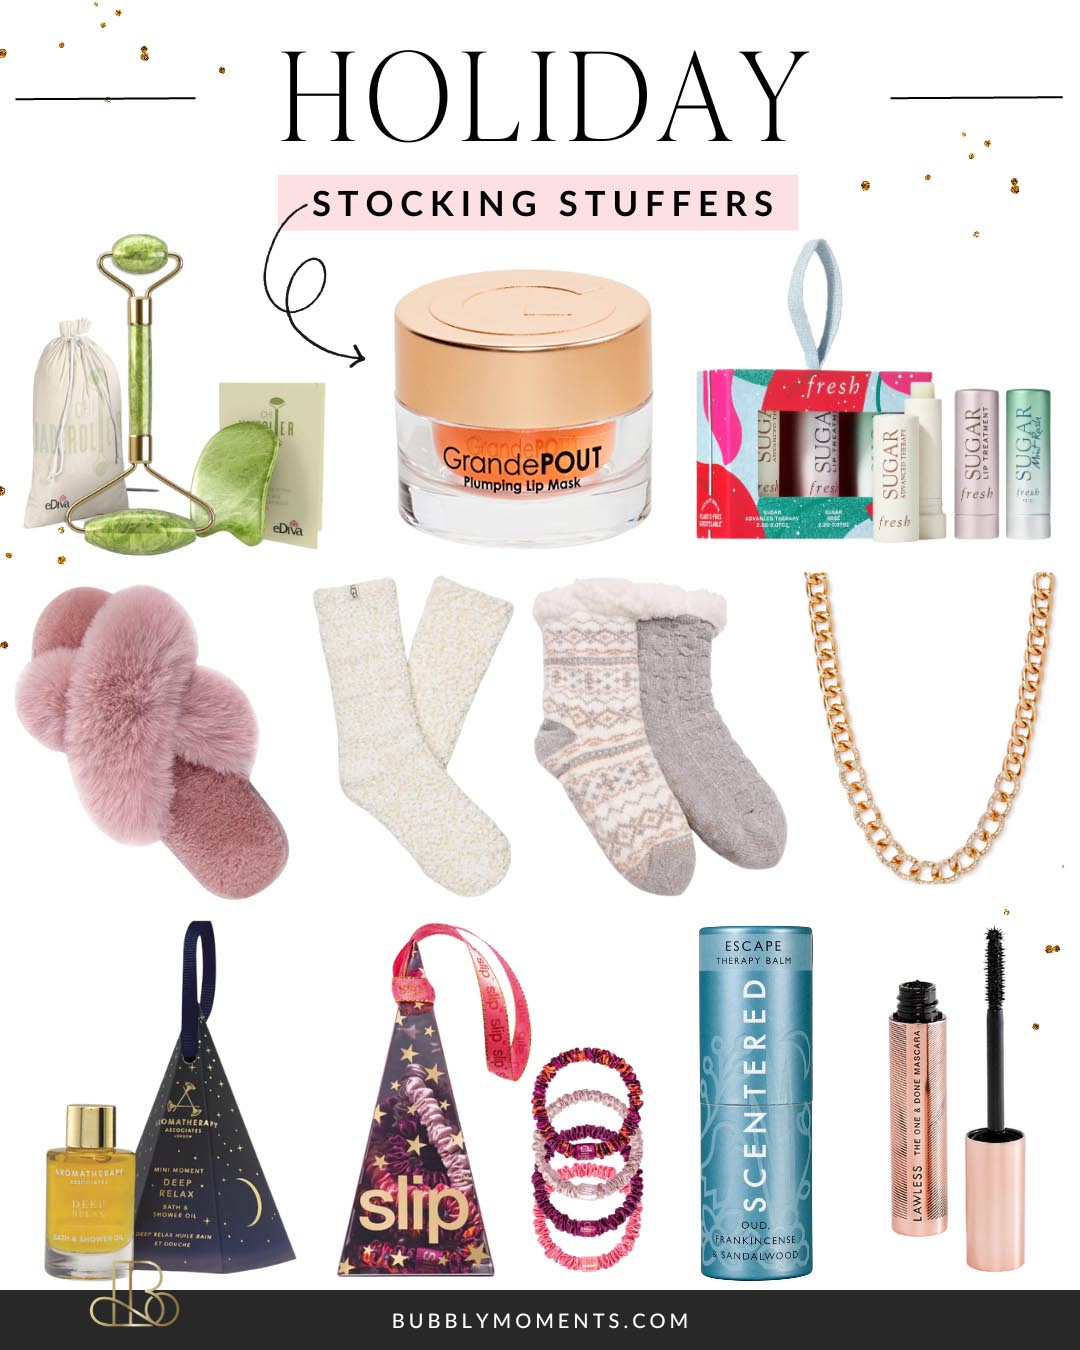 19 Stocking Stuffers Under $25 For The Entire Family